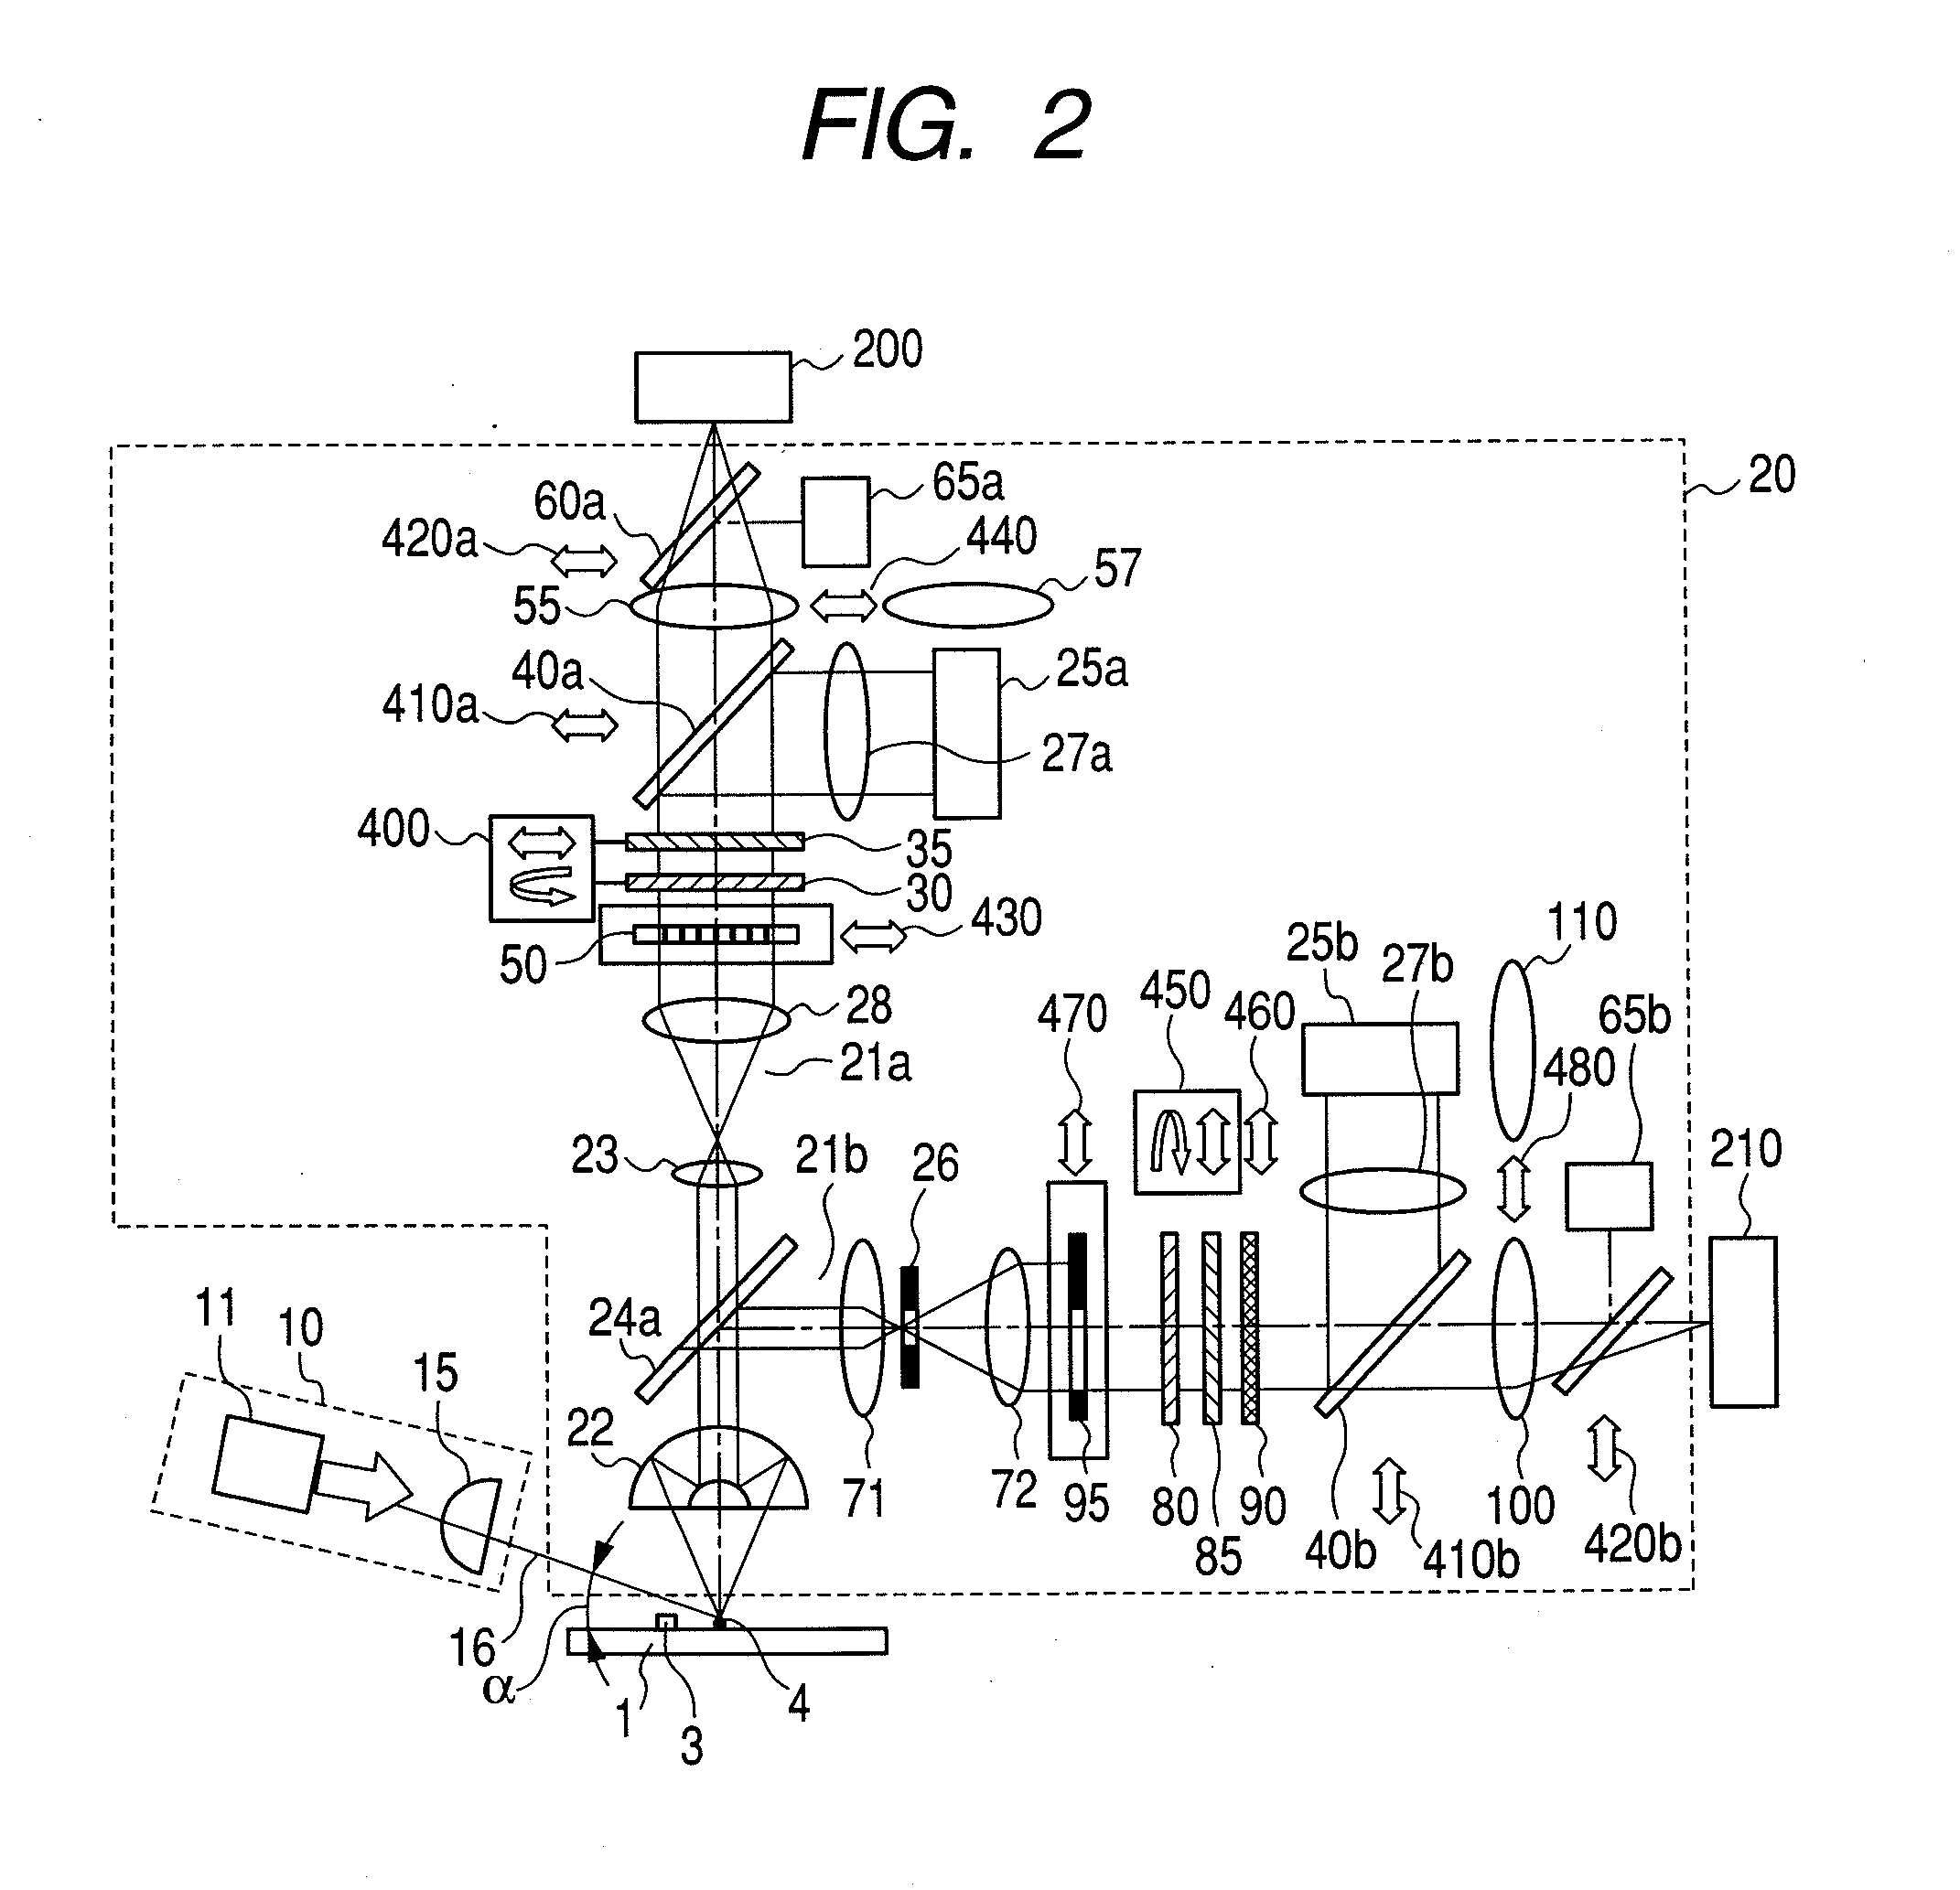 Apparatus for inspecting defects